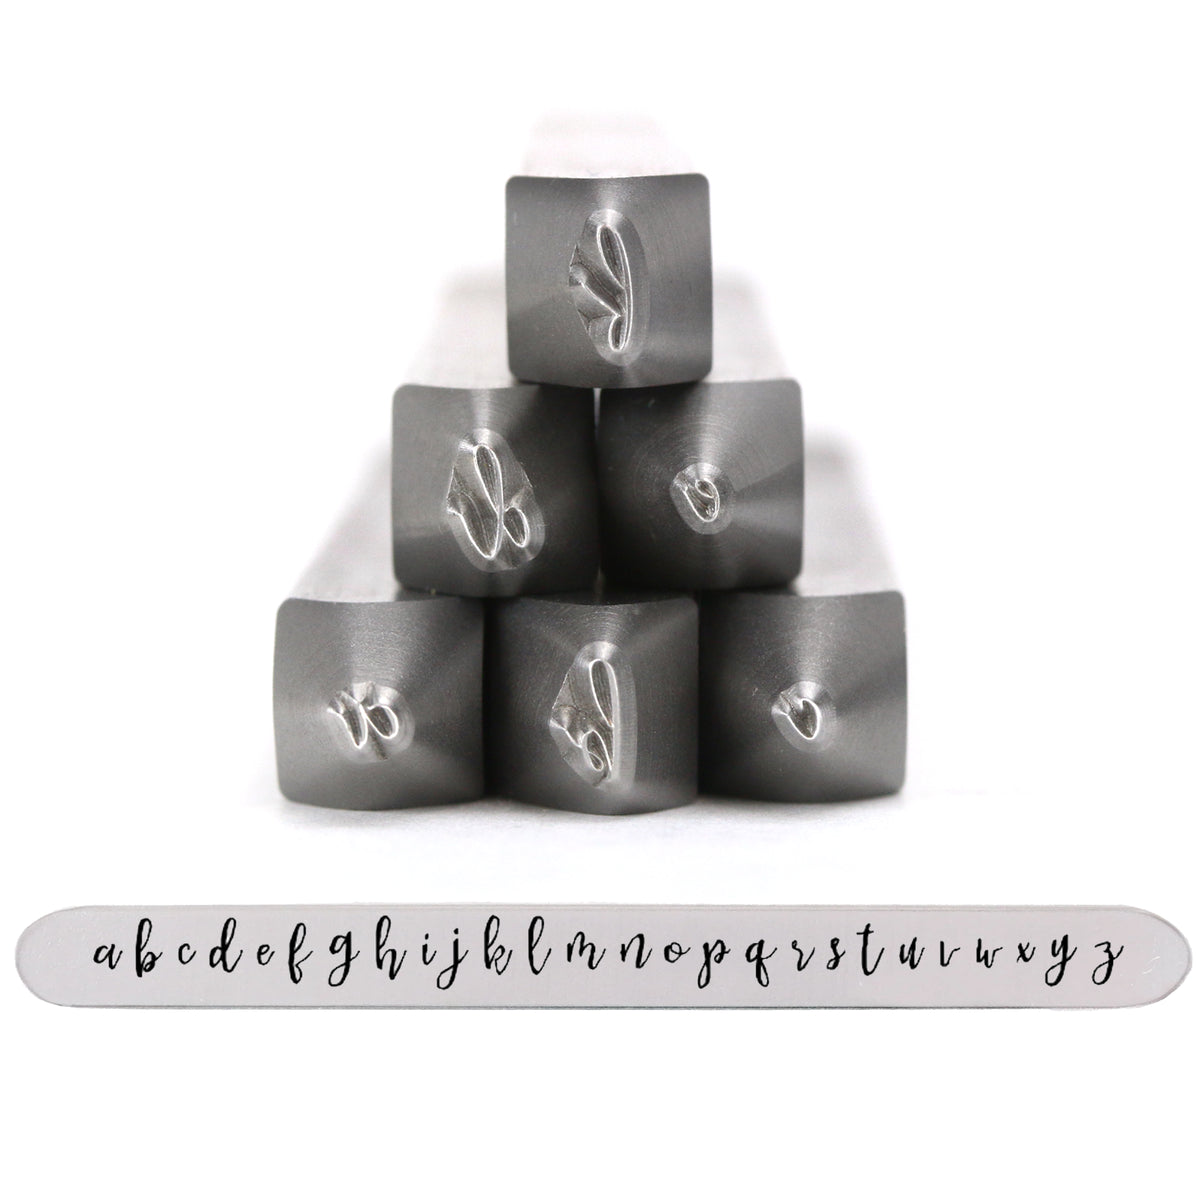 Beaducation Exact Series, Kismet Uppercase Letter Stamp Set 4.5mm, By Stamp  Yours - Tapered Down Shanks